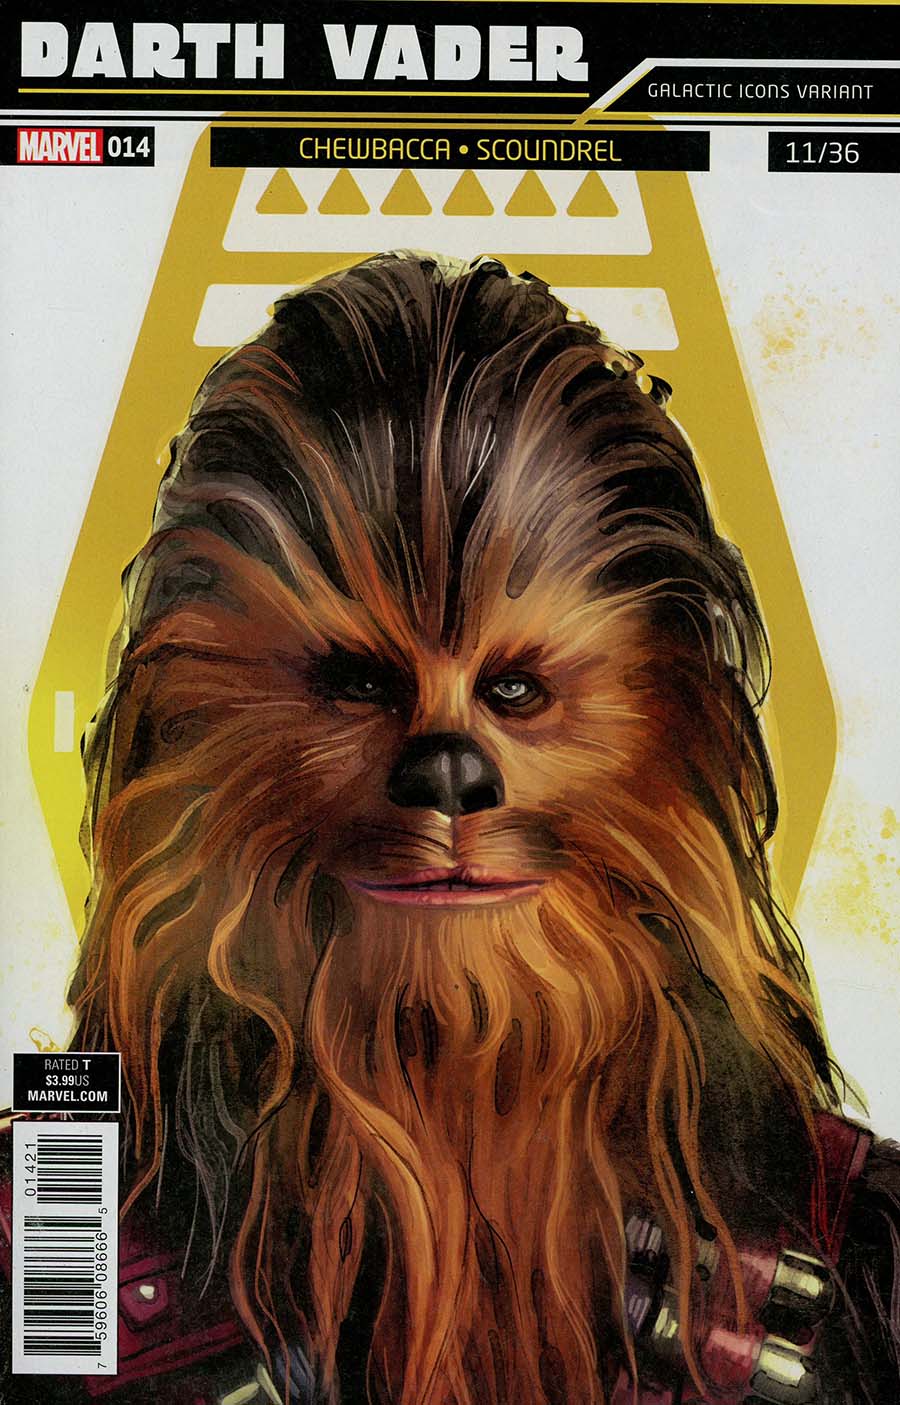 Darth Vader Vol 2 #14 Cover B Variant Rod Reis Galactic Icon Cover